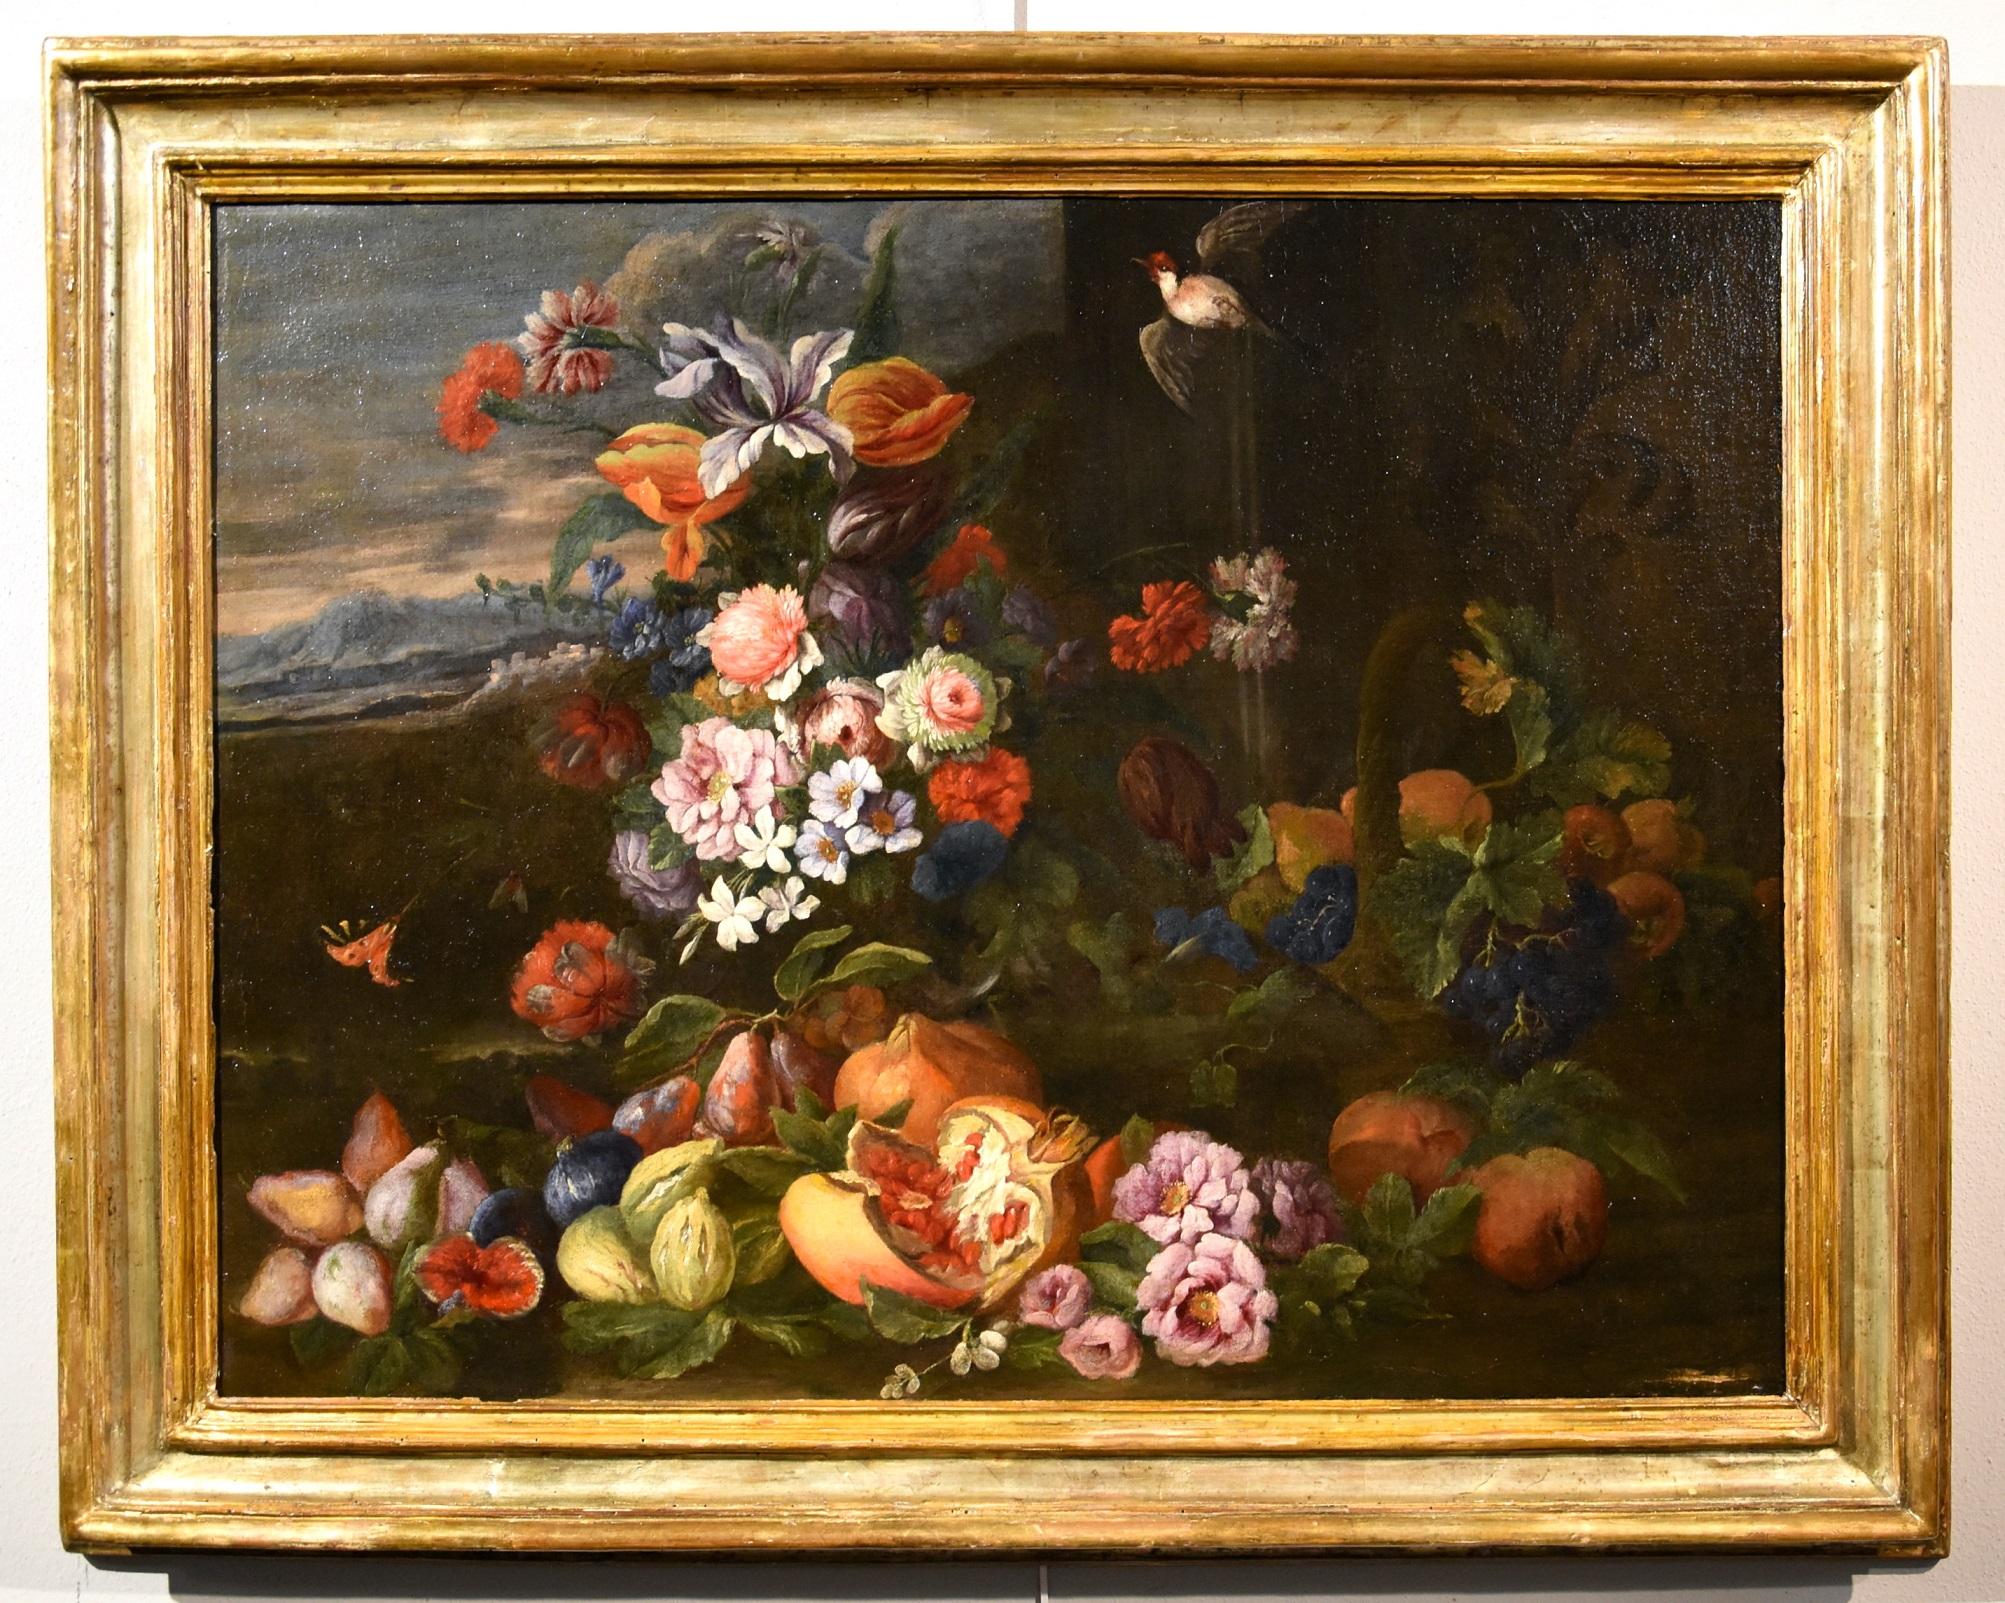 Brueghel Still Life Flowers Fruits Paint Old master Flemish 17th Century Italy - Painting by Abraham Brueghel (Antwerp, 1631 - Naples, 1697)